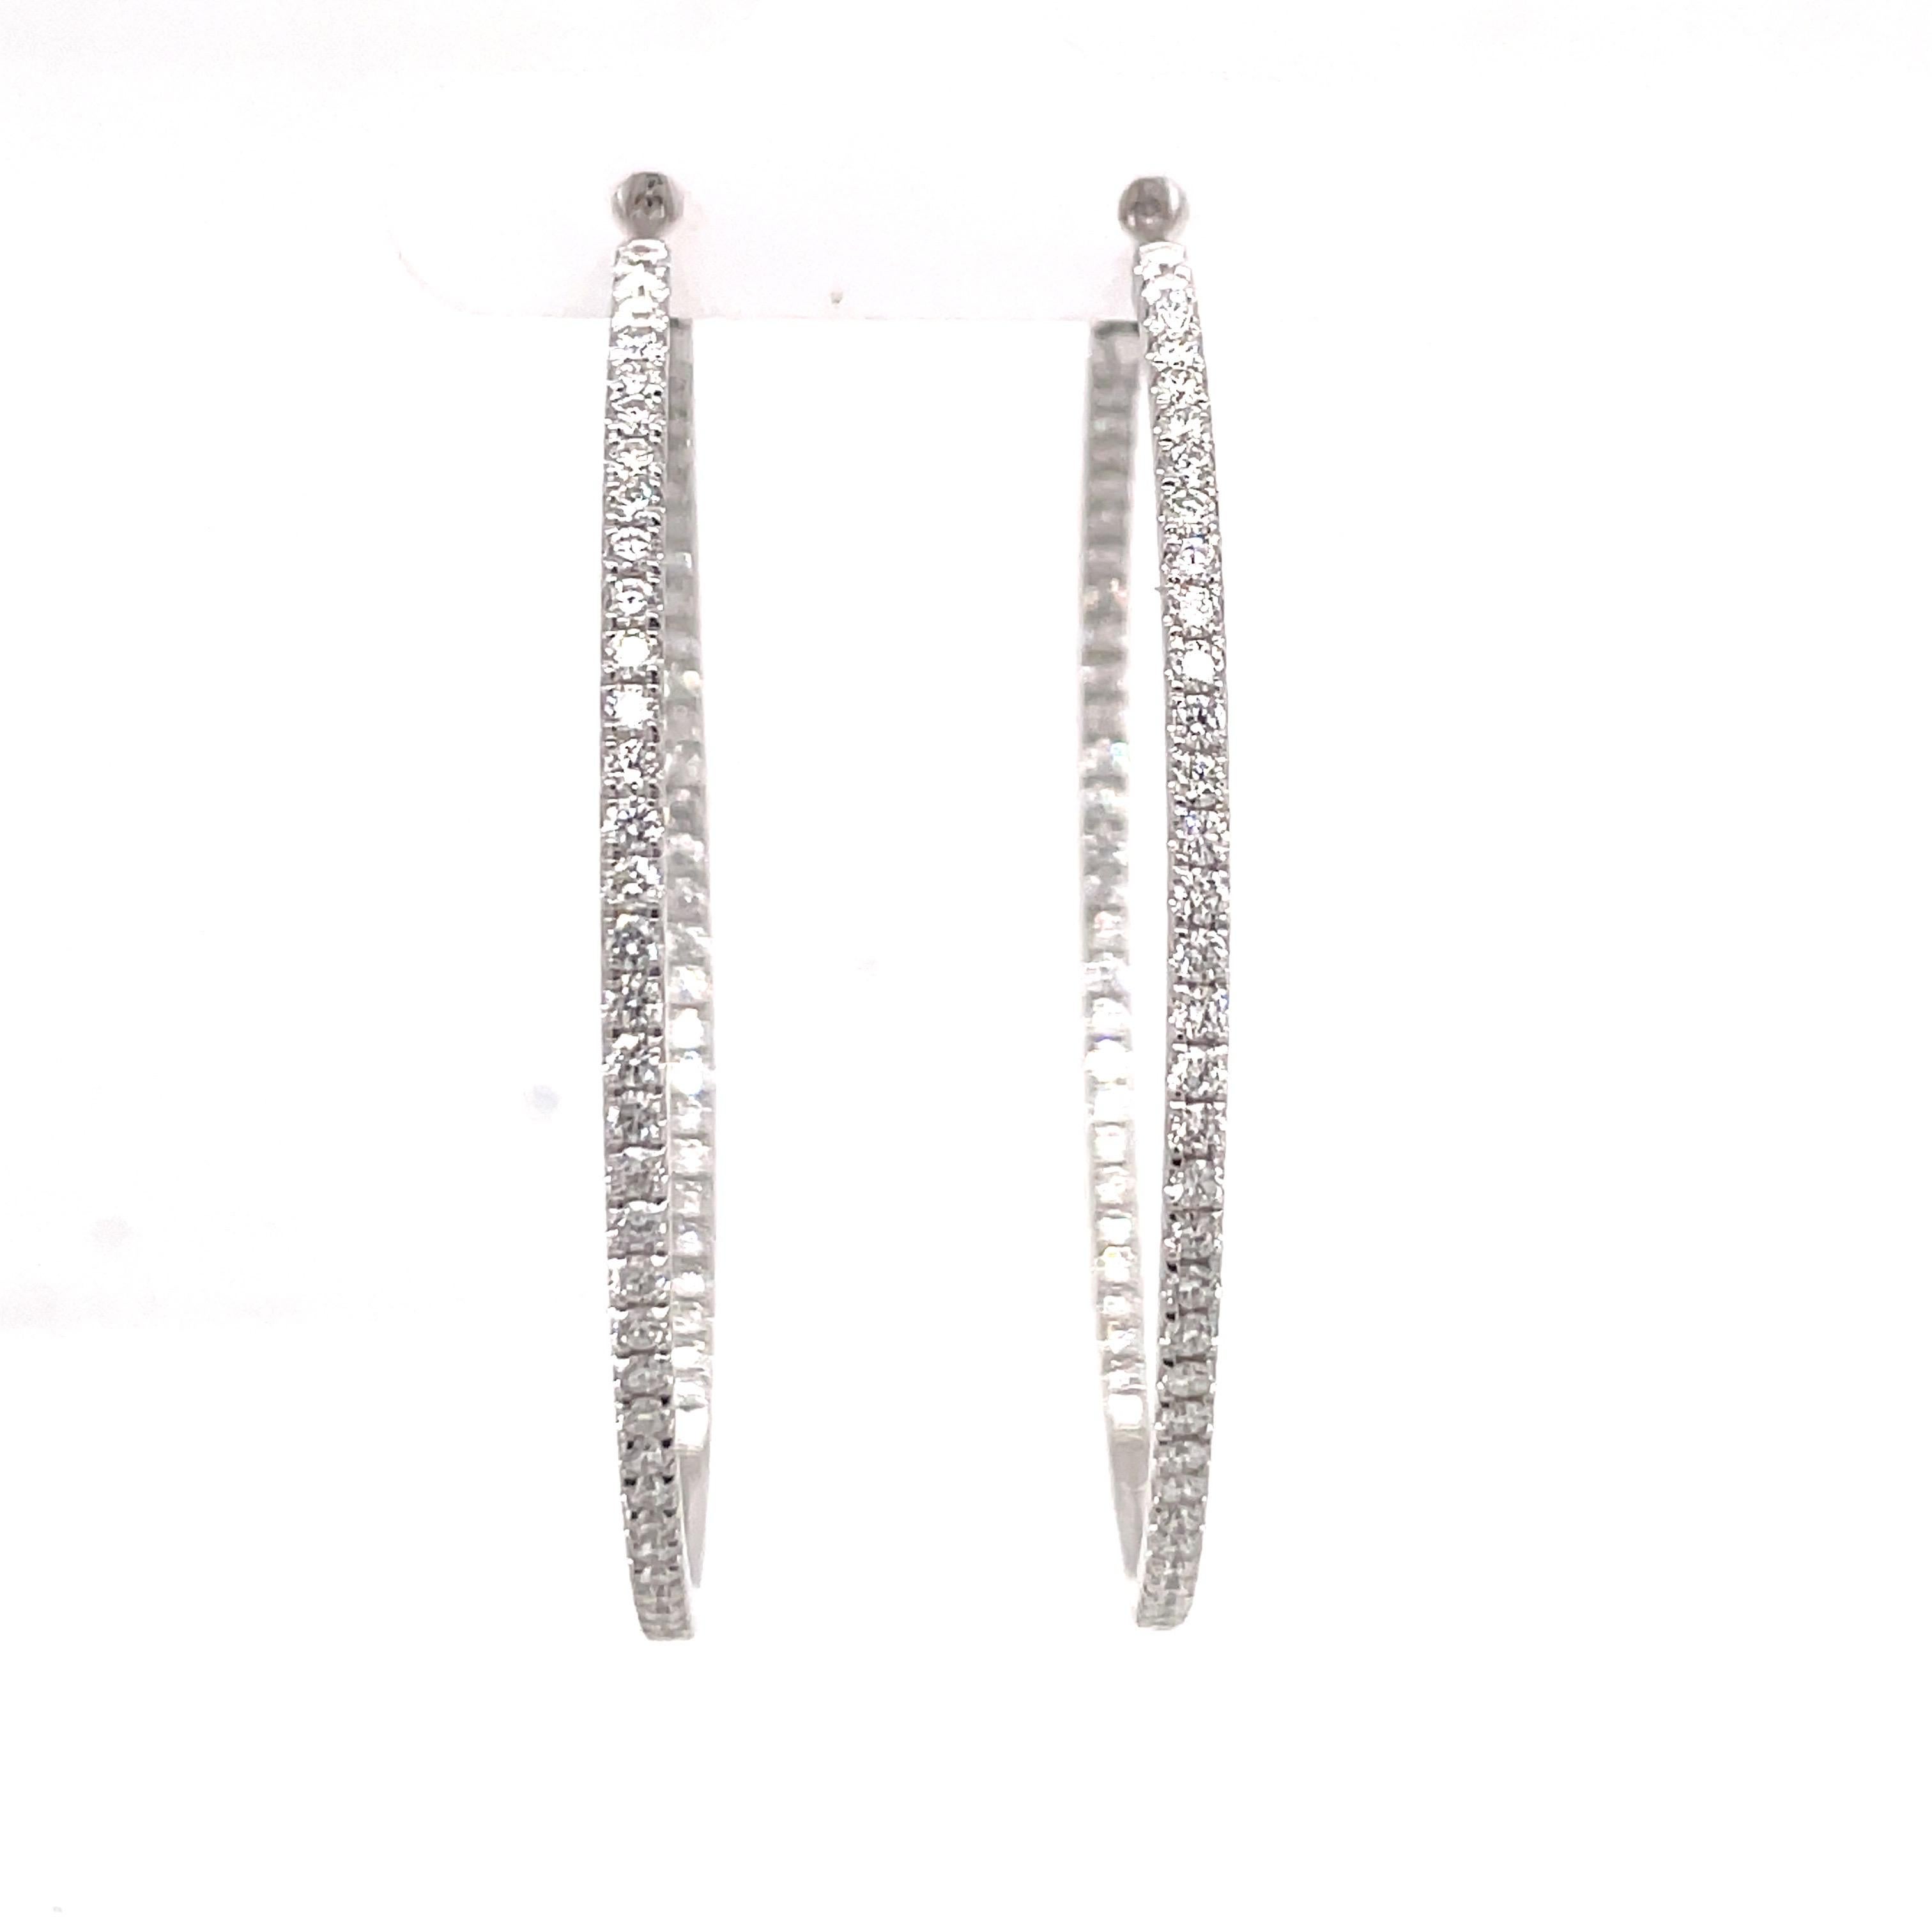 14 Karat white gold hoop earrings featuring 140 round brilliants weighing 2.30 carats. 
Color G-H
Clarity SI

More hoops available in size & gold color.